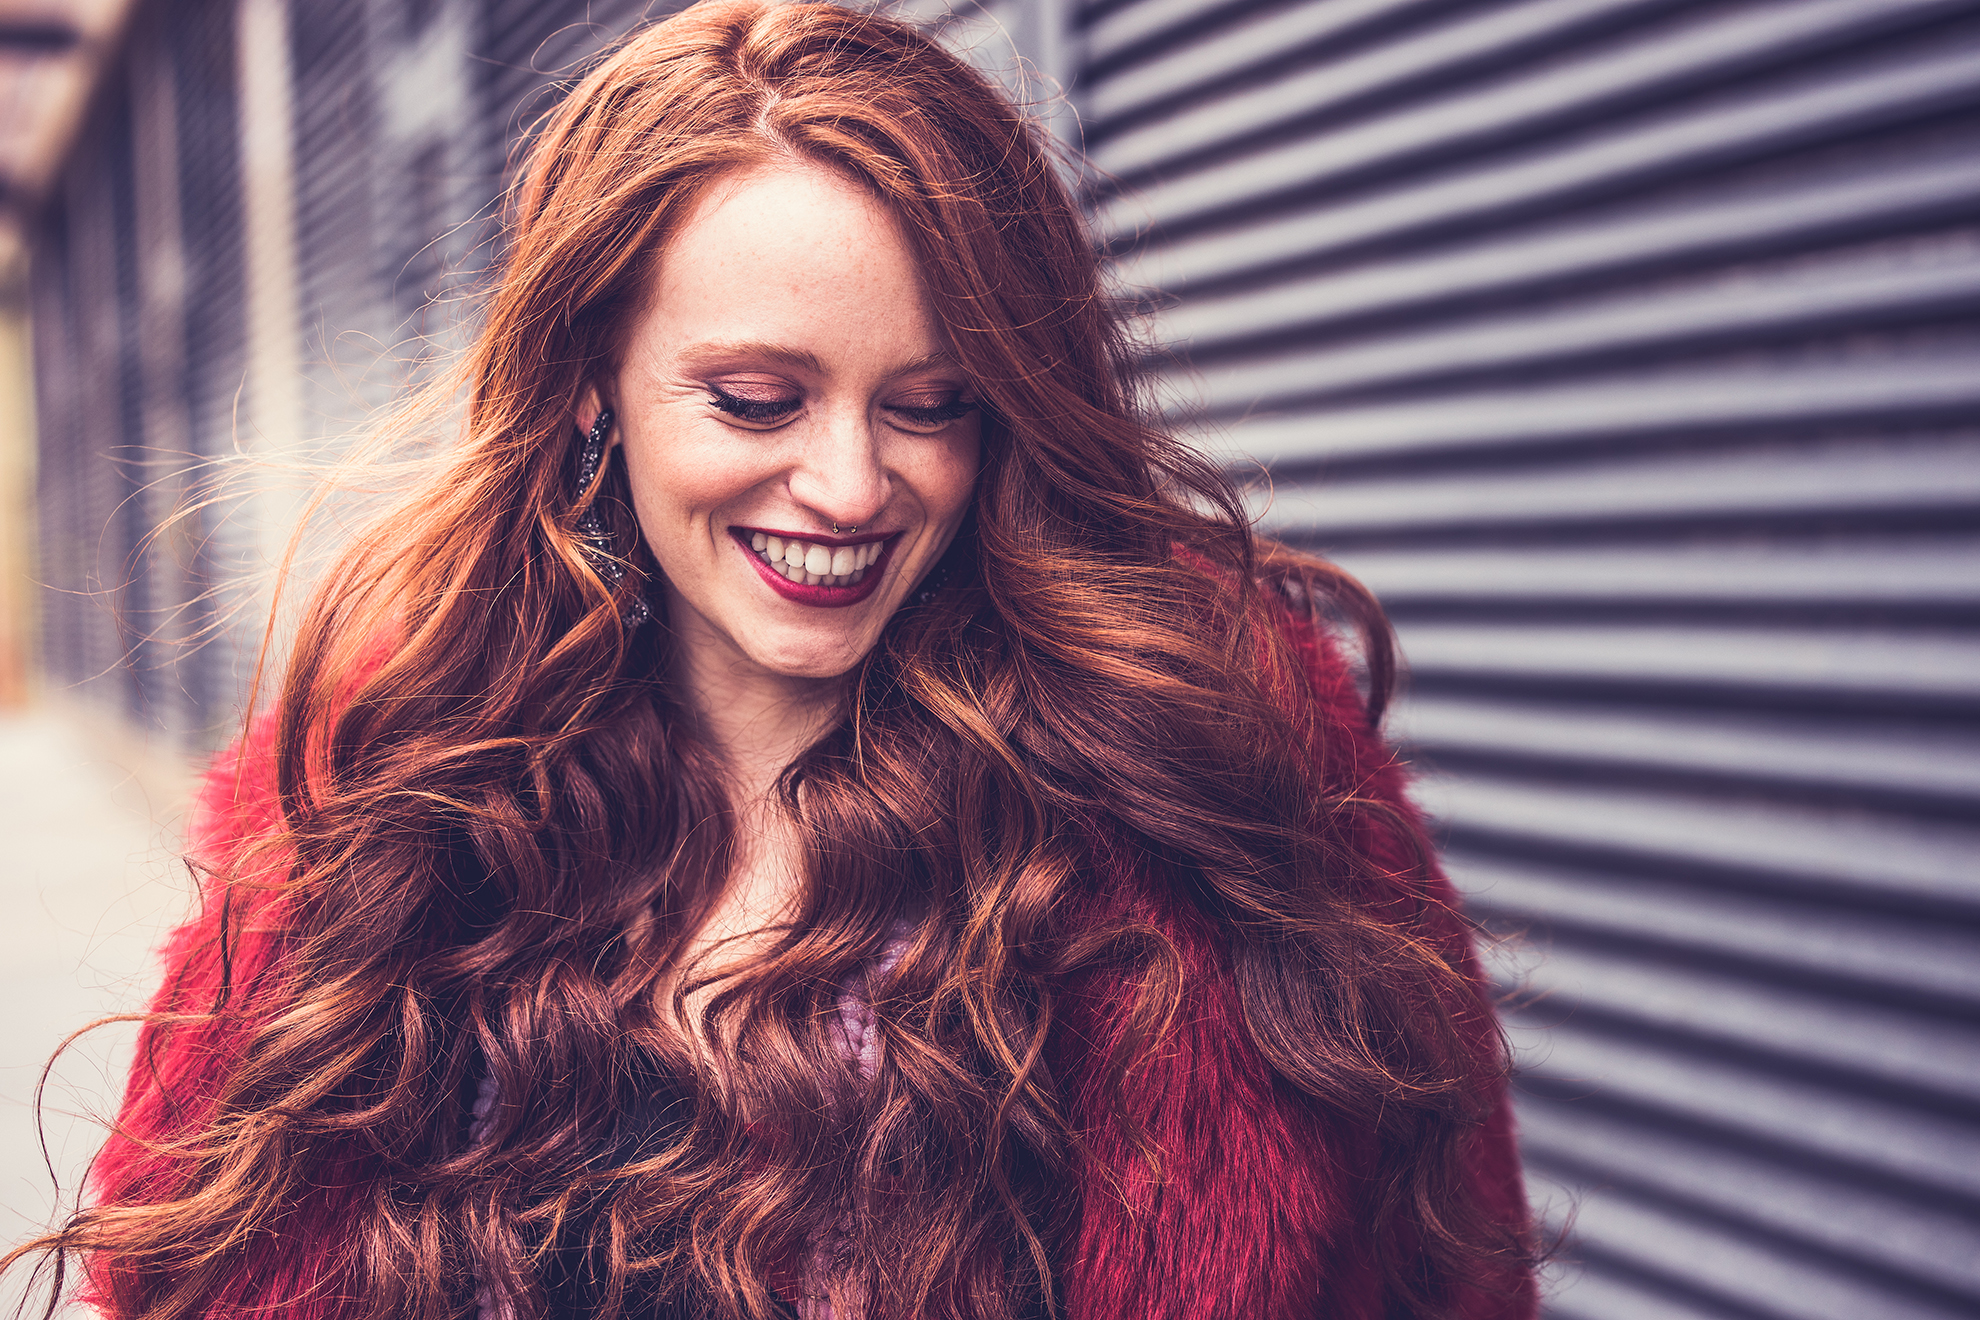 Red-haired model portrait smiling down at the ground with bright red lipstick and matching red fur coat